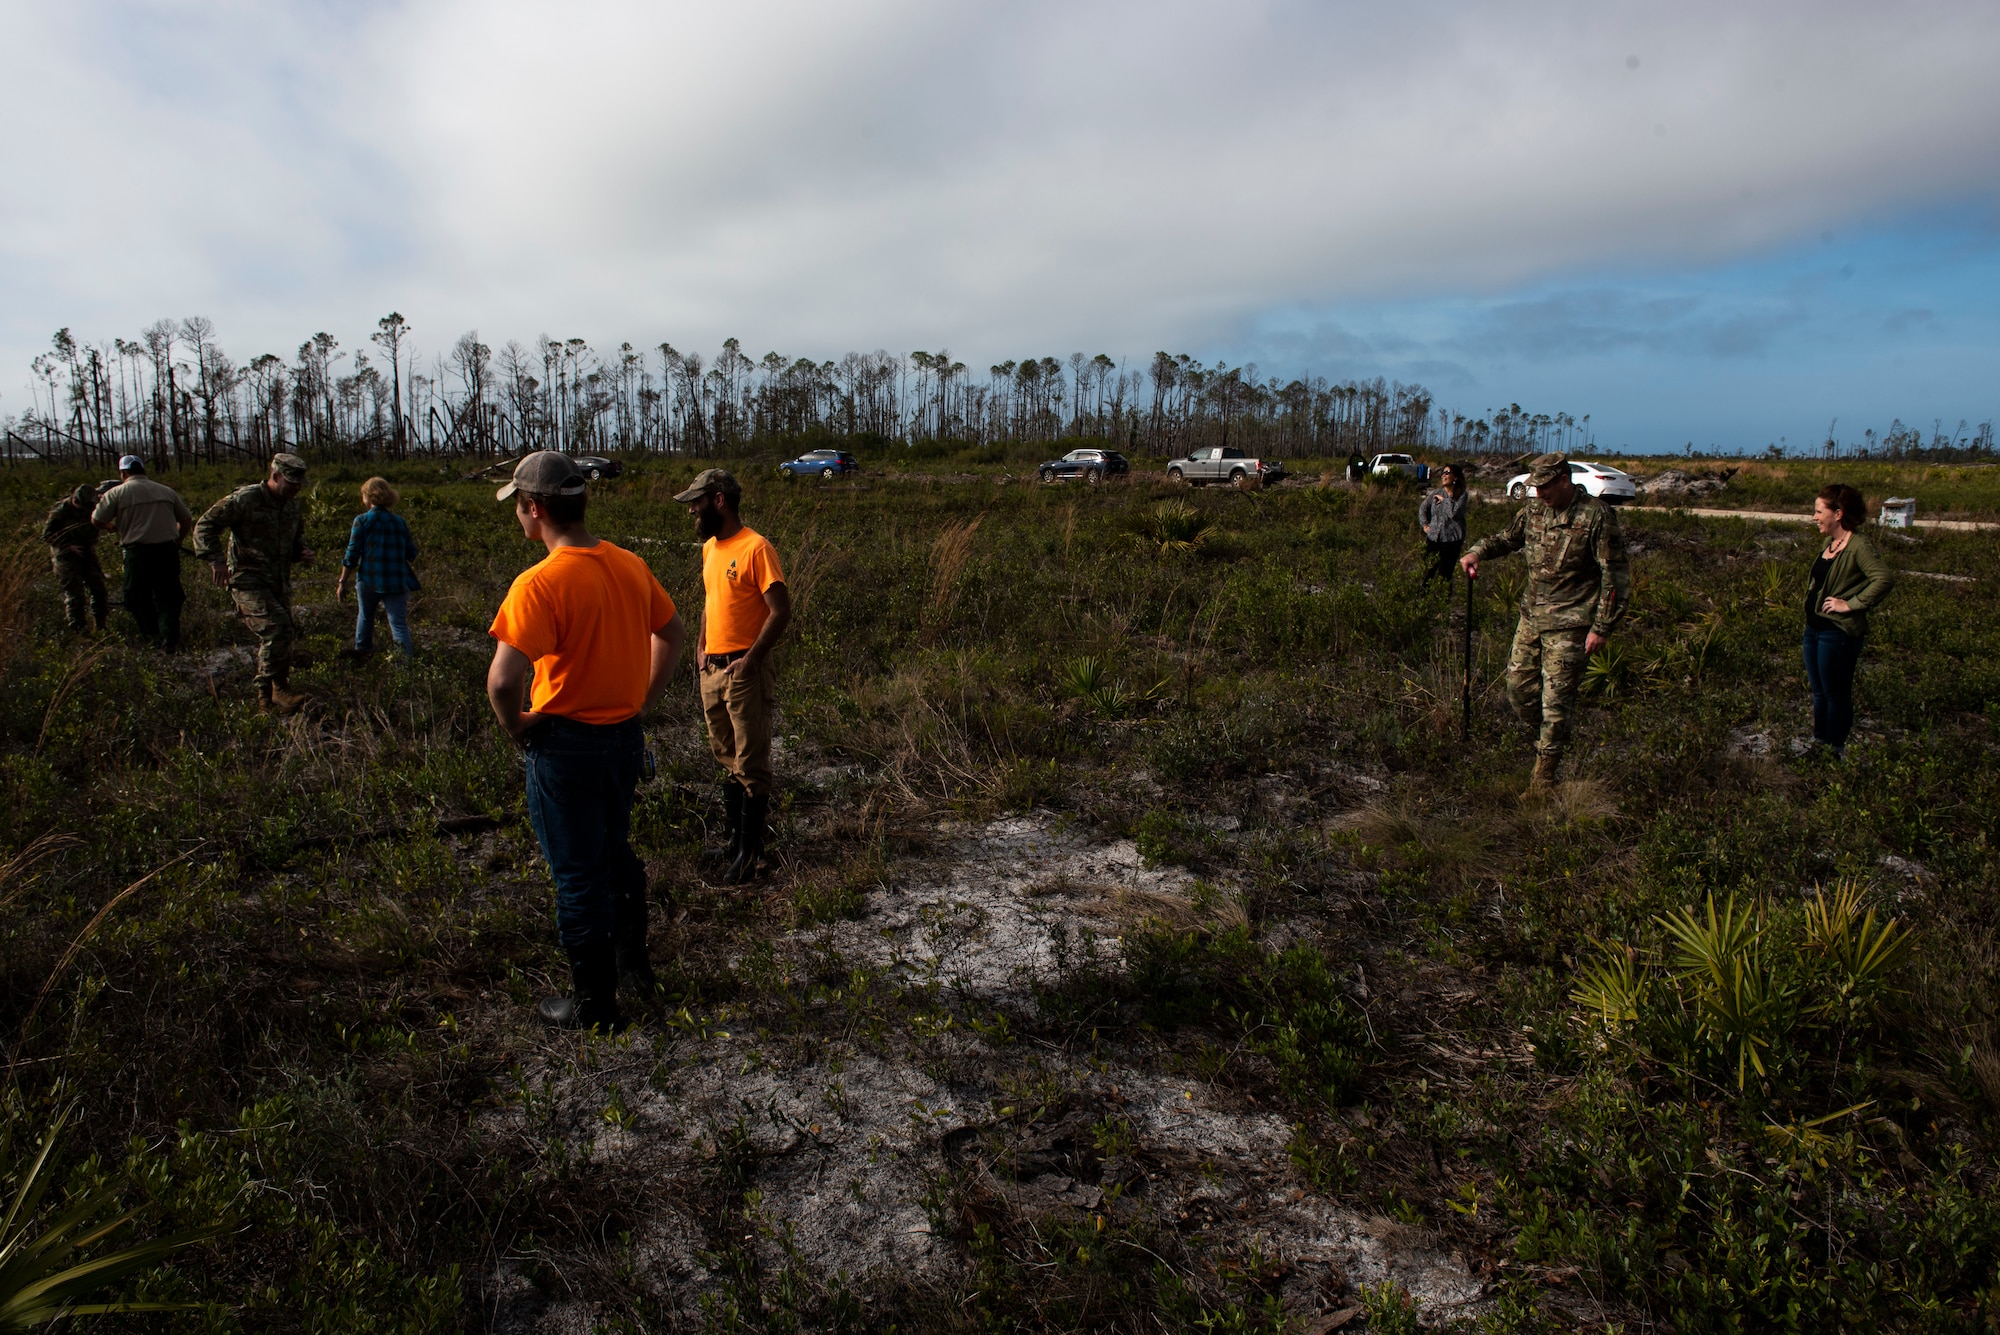 Airmen, their spouses, and civilian partners plant longleaf pine trees at Tyndall Air Force Base, Florida, Jan. 15, 2020. The 325th Civil Engineer Squadron natural resources section, and contracted partners, will begin planting longleaf pine trees along Highway 98 near Fire Station 4 at Silver Flag Road. (U.S. Air Force photo by Staff Sgt. Magen M. Reeves)